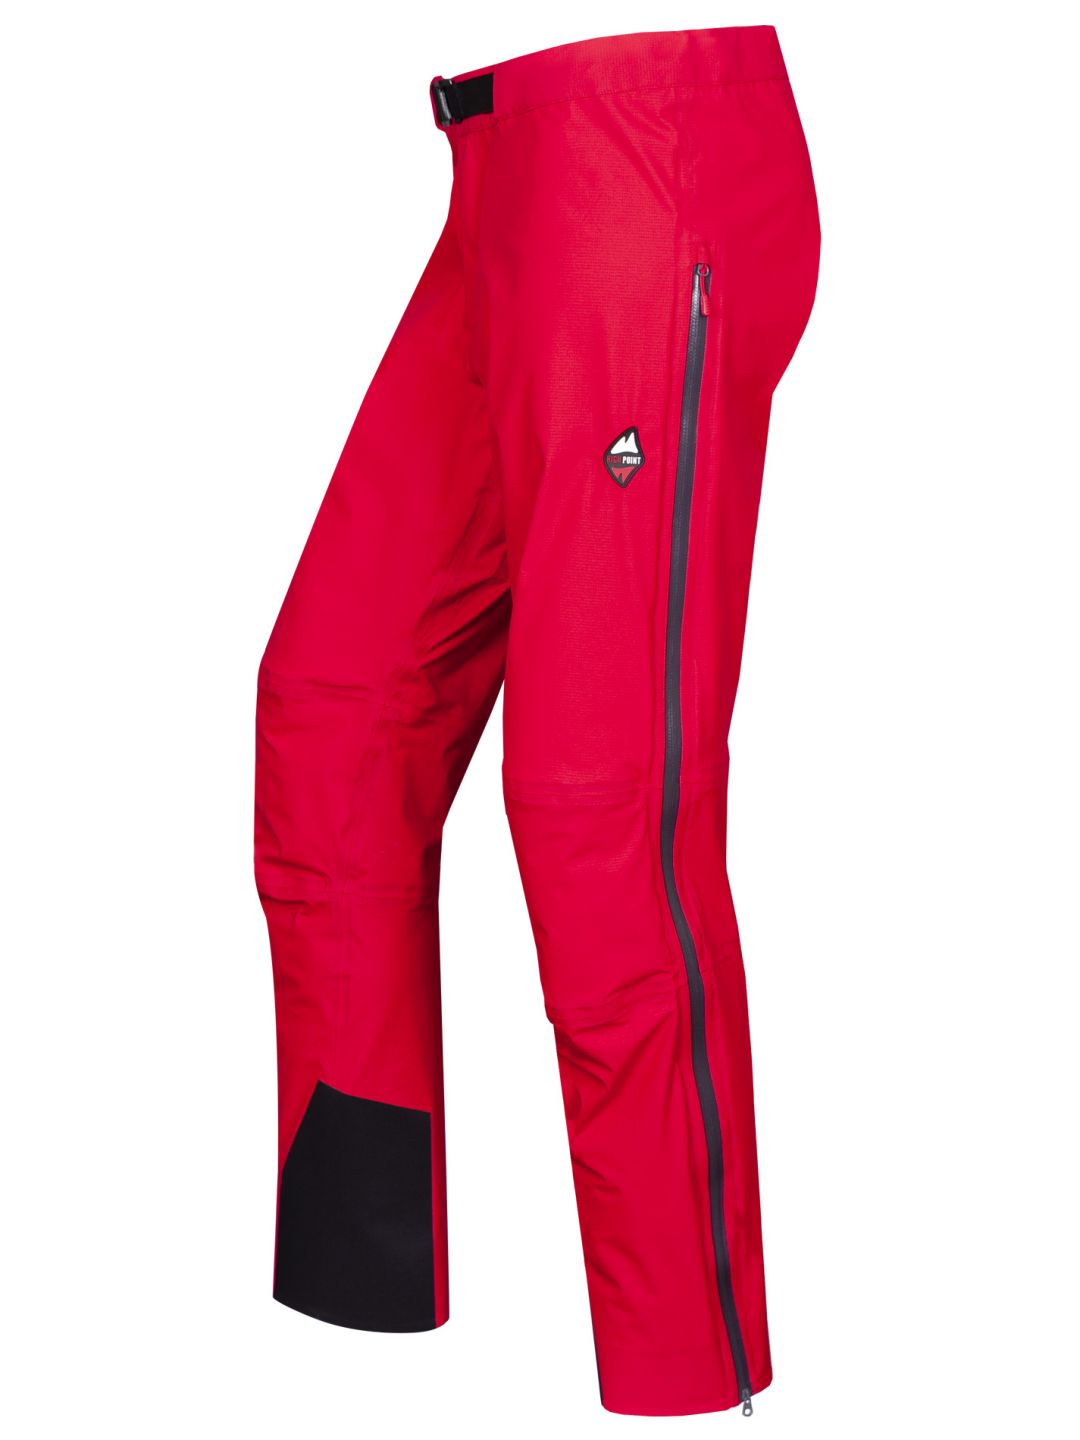 HIGH POINT CLIFF pants red varianta: M